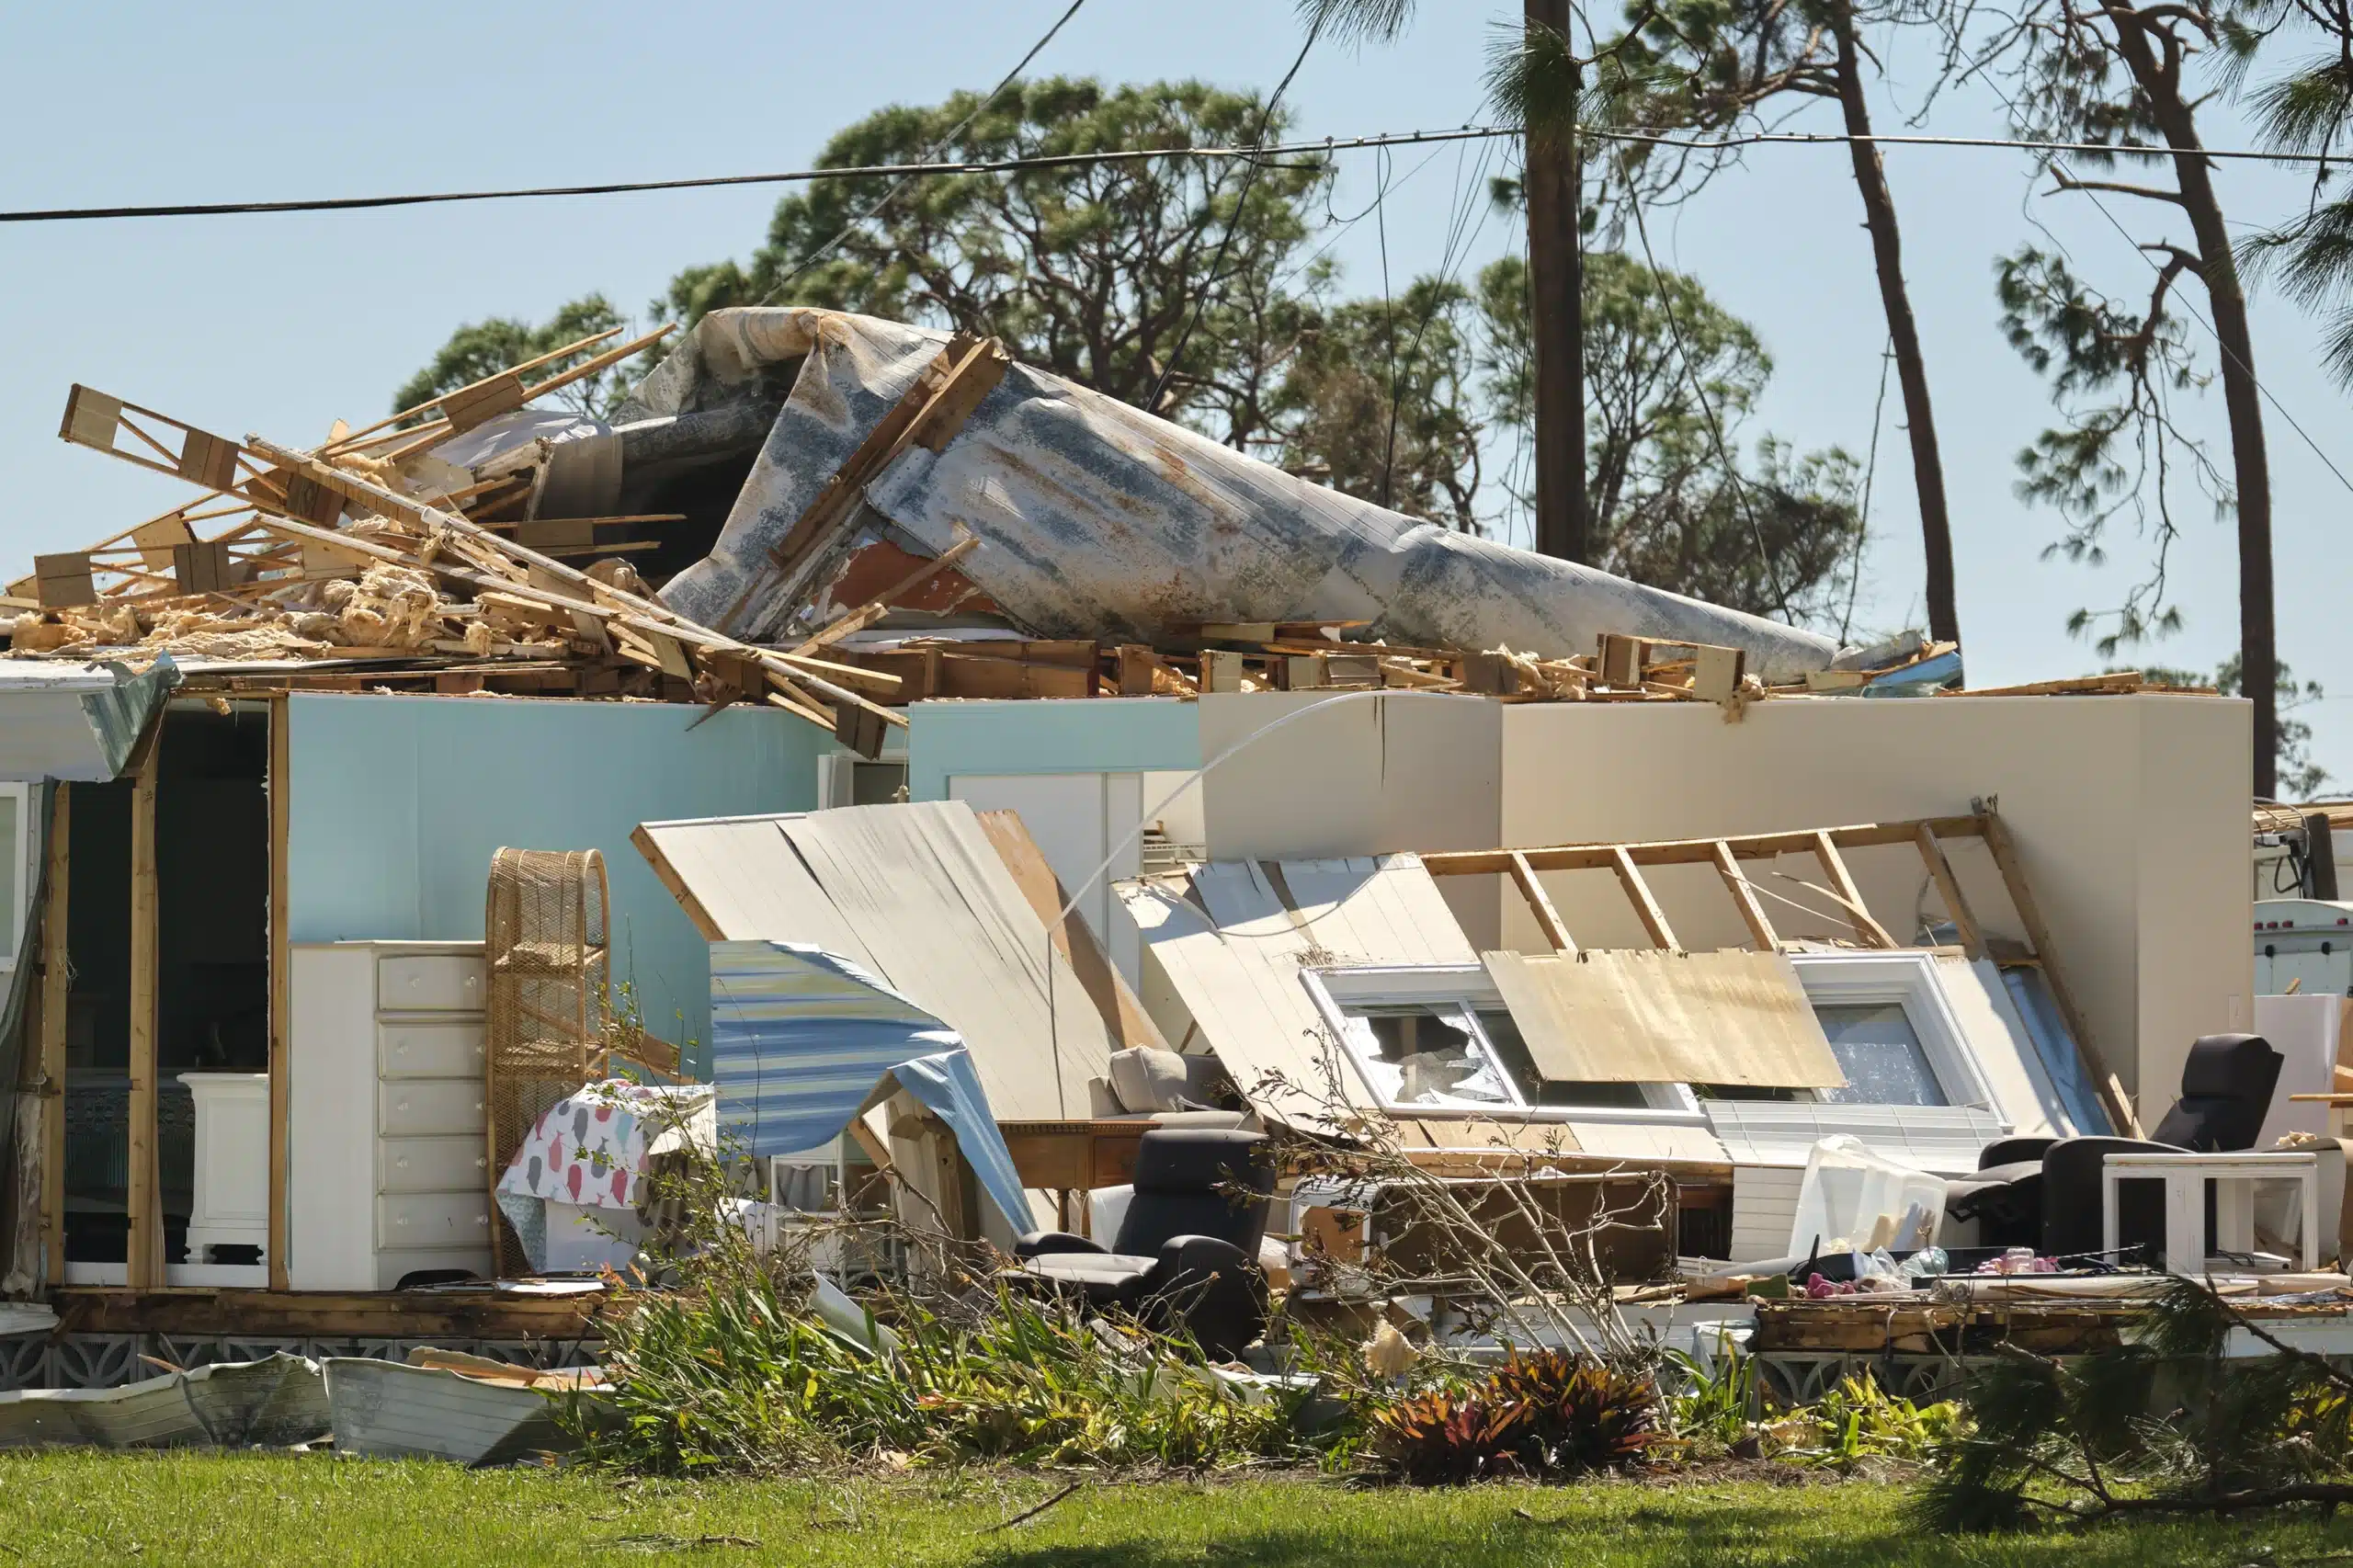 Will Homeowners Insurance Cover Hurricane Debris Removal?